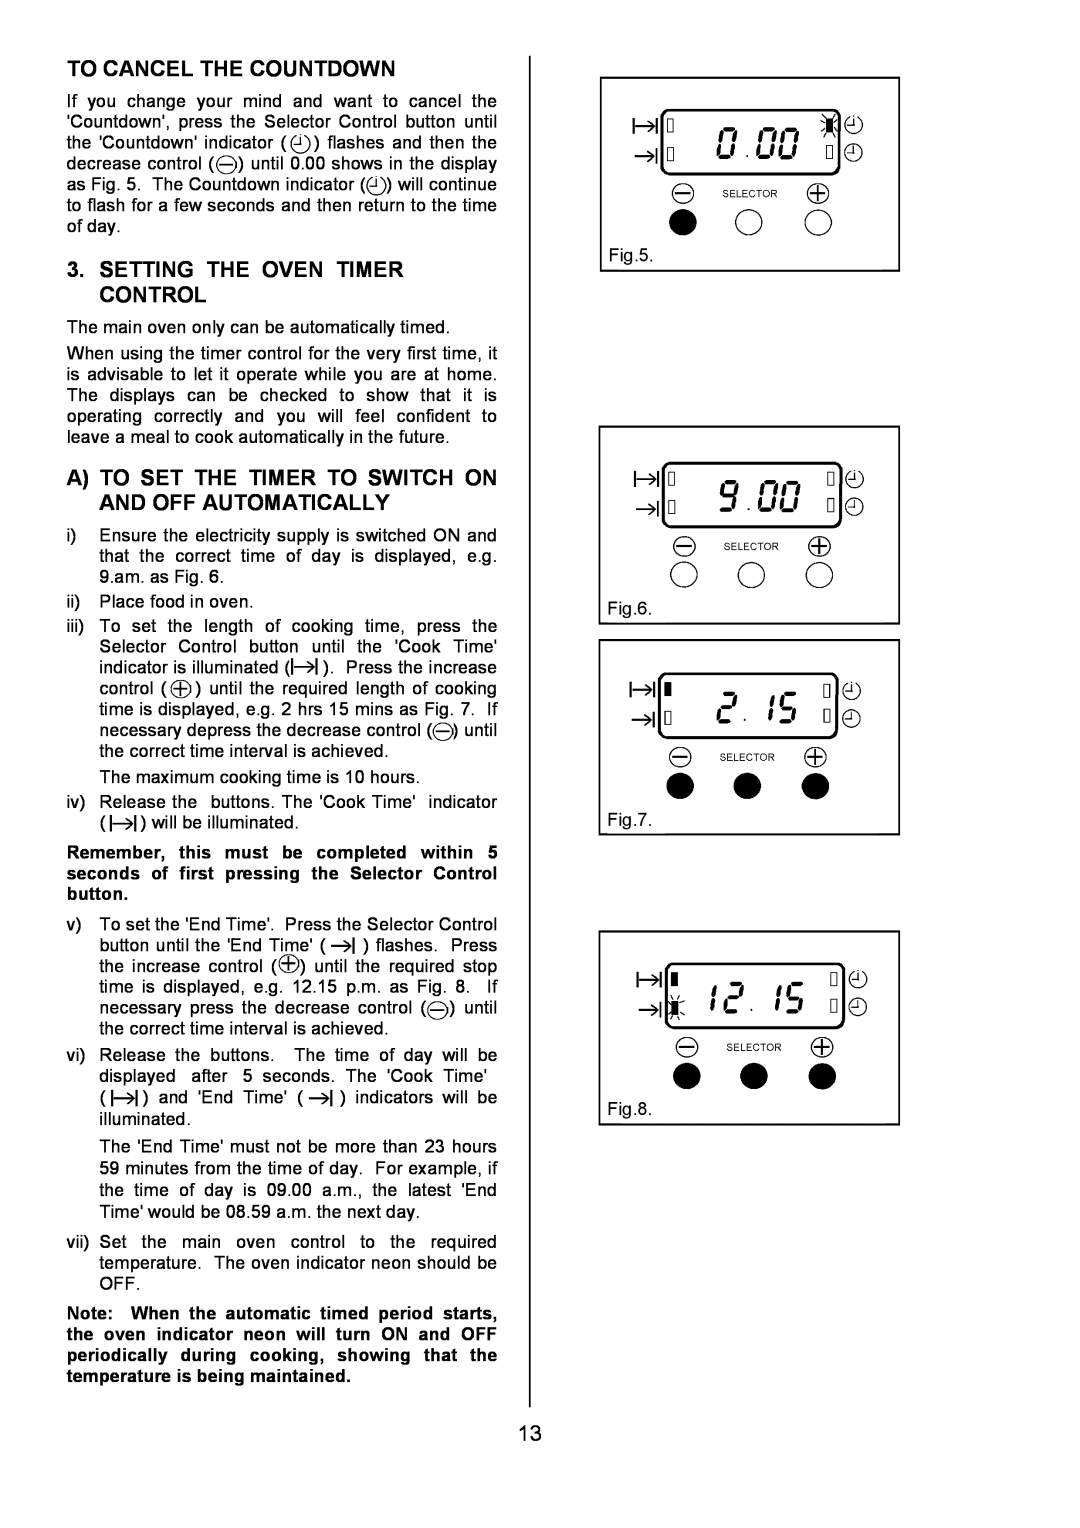 Tricity Bendix SIE555 installation instructions To Cancel The Countdown, Setting The Oven Timer Control 